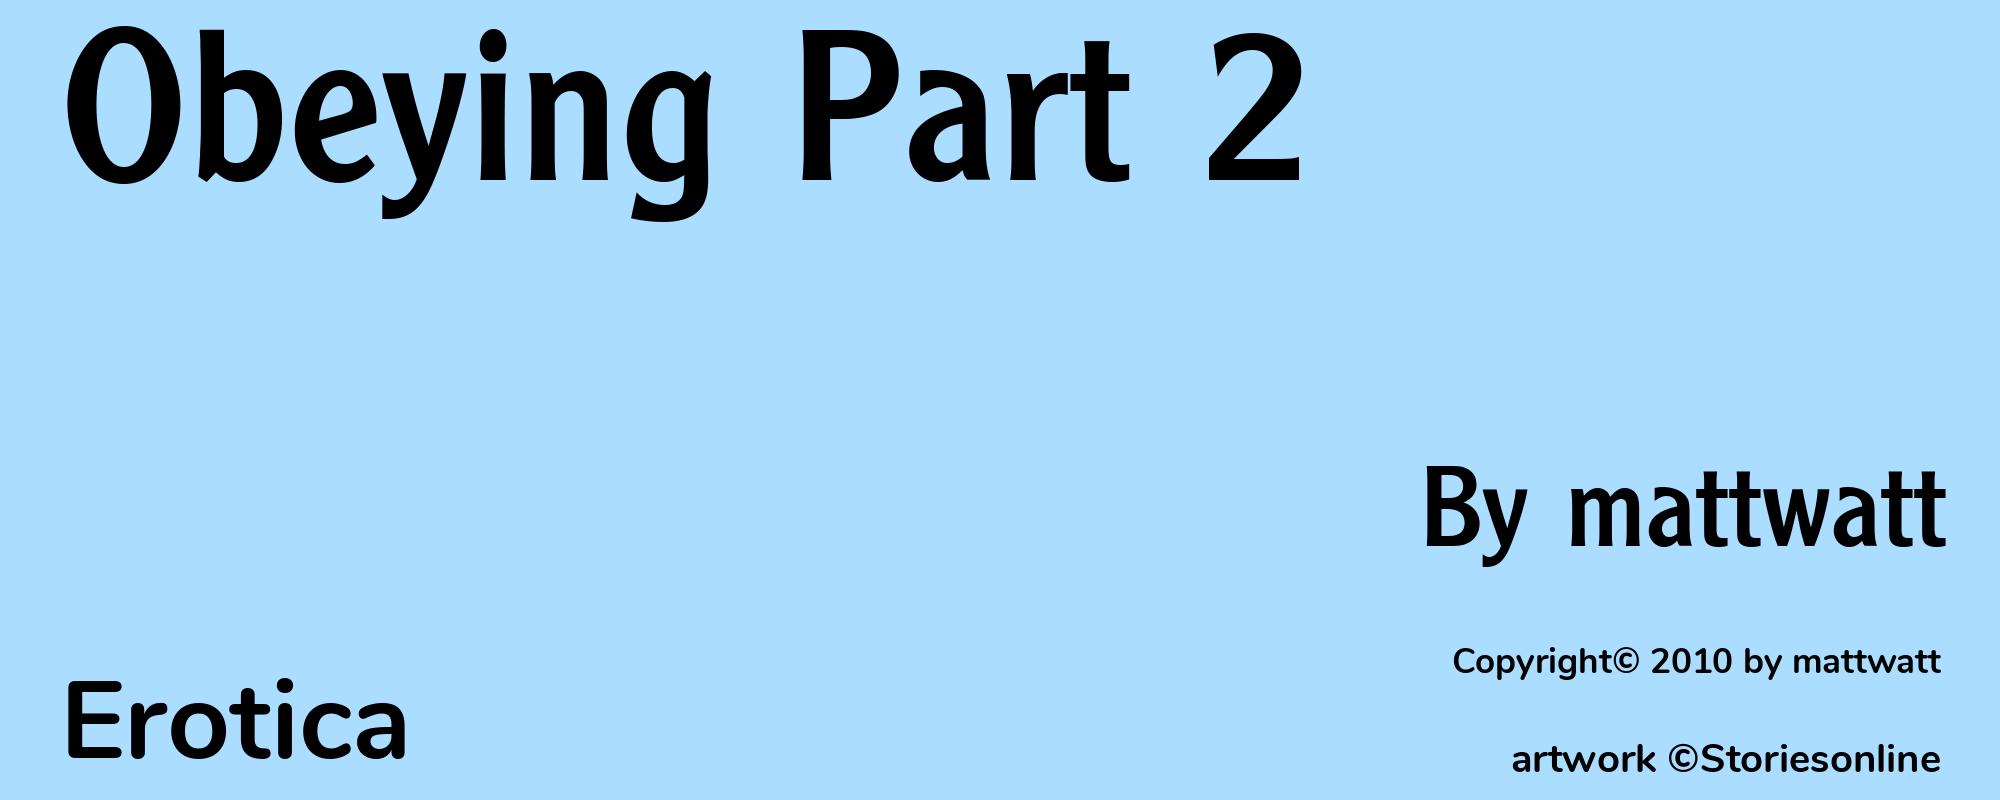 Obeying Part 2 - Cover